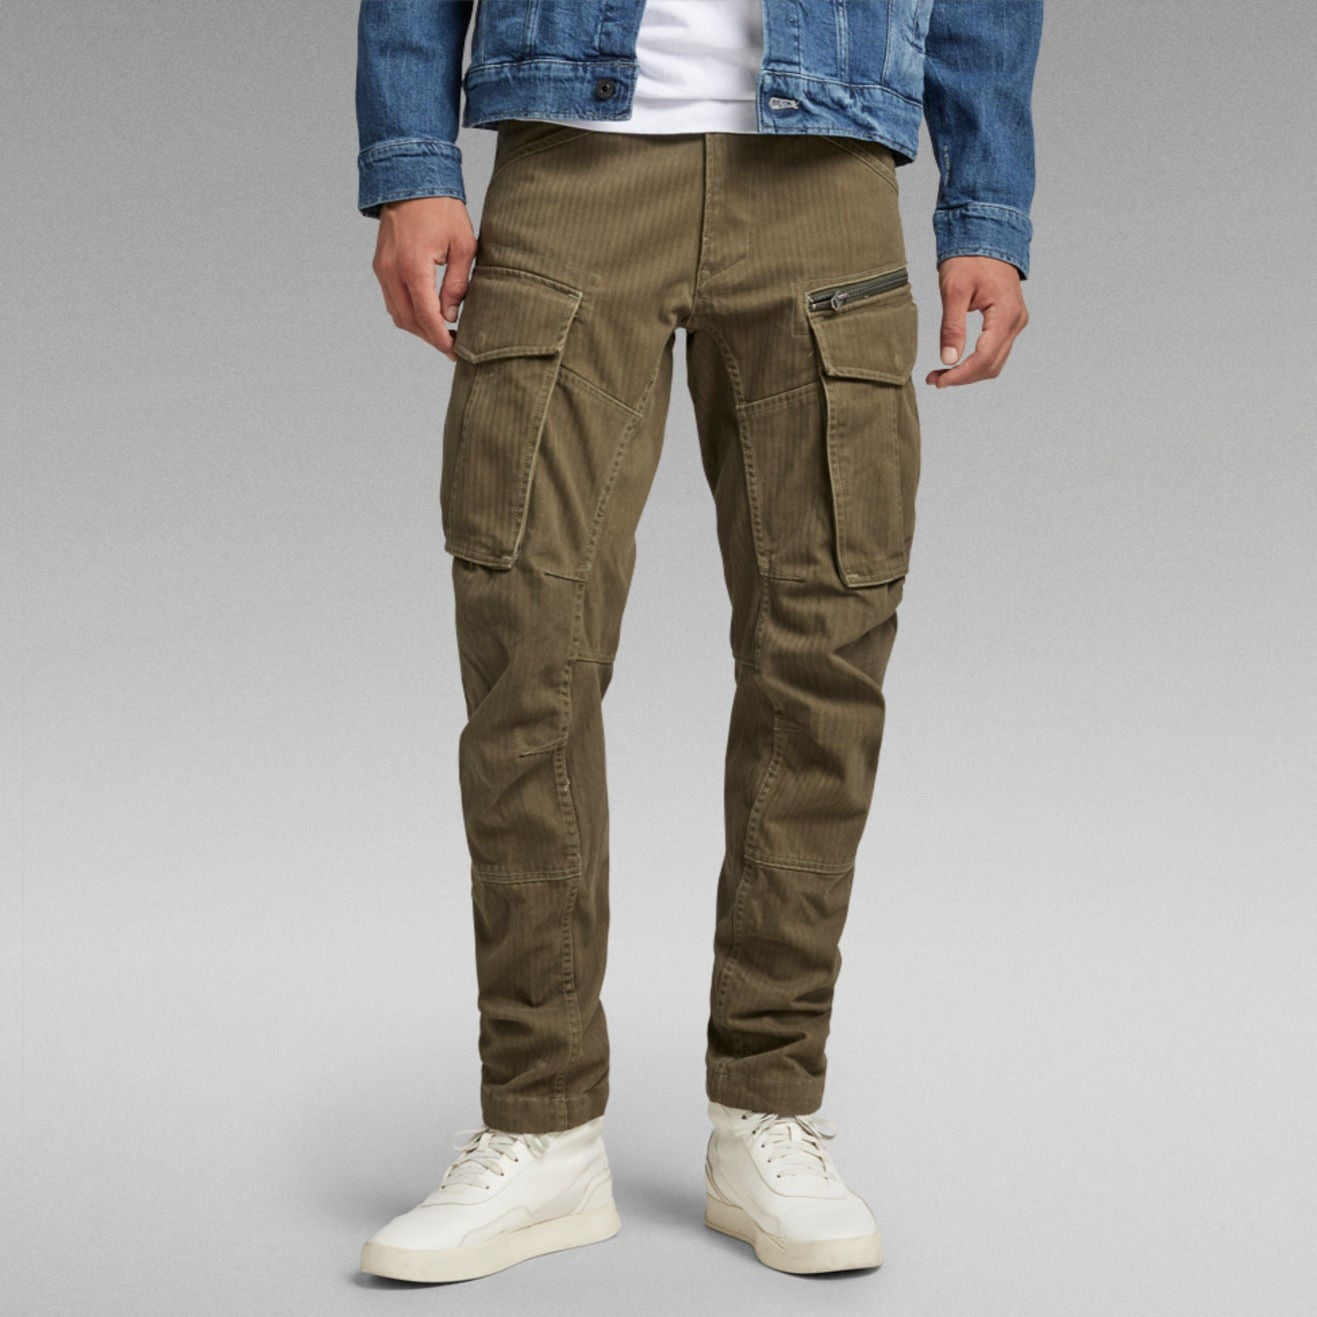 G-Star Raw - Rovic Zip 3D Regular Tapered - Shadow Olive